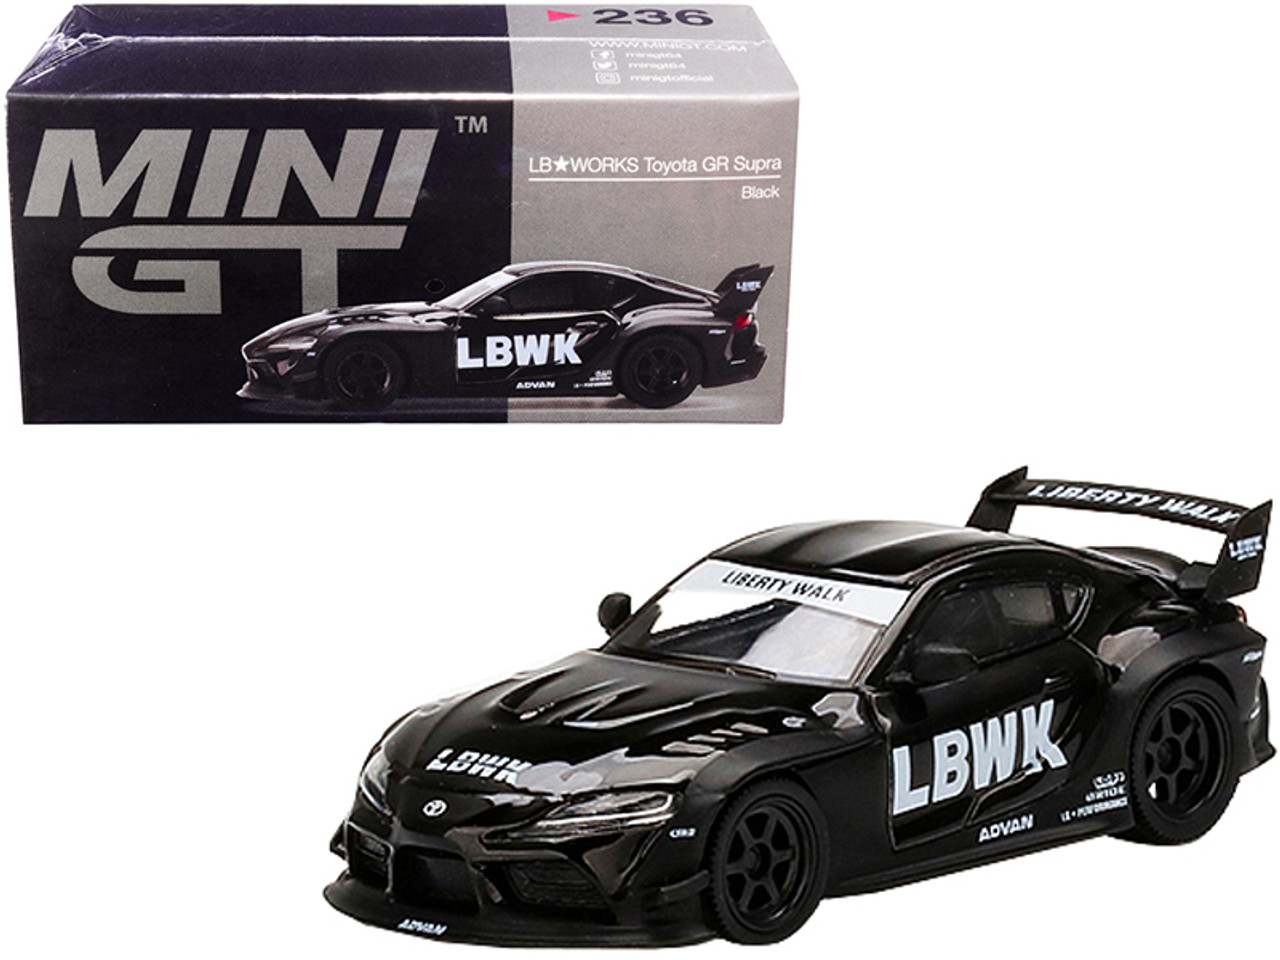 Toyota GR Supra LB Works RHD (Right Hand Drive) Black "China Exclusive" 1/64 Diecast Model Car by True Scale Miniatures